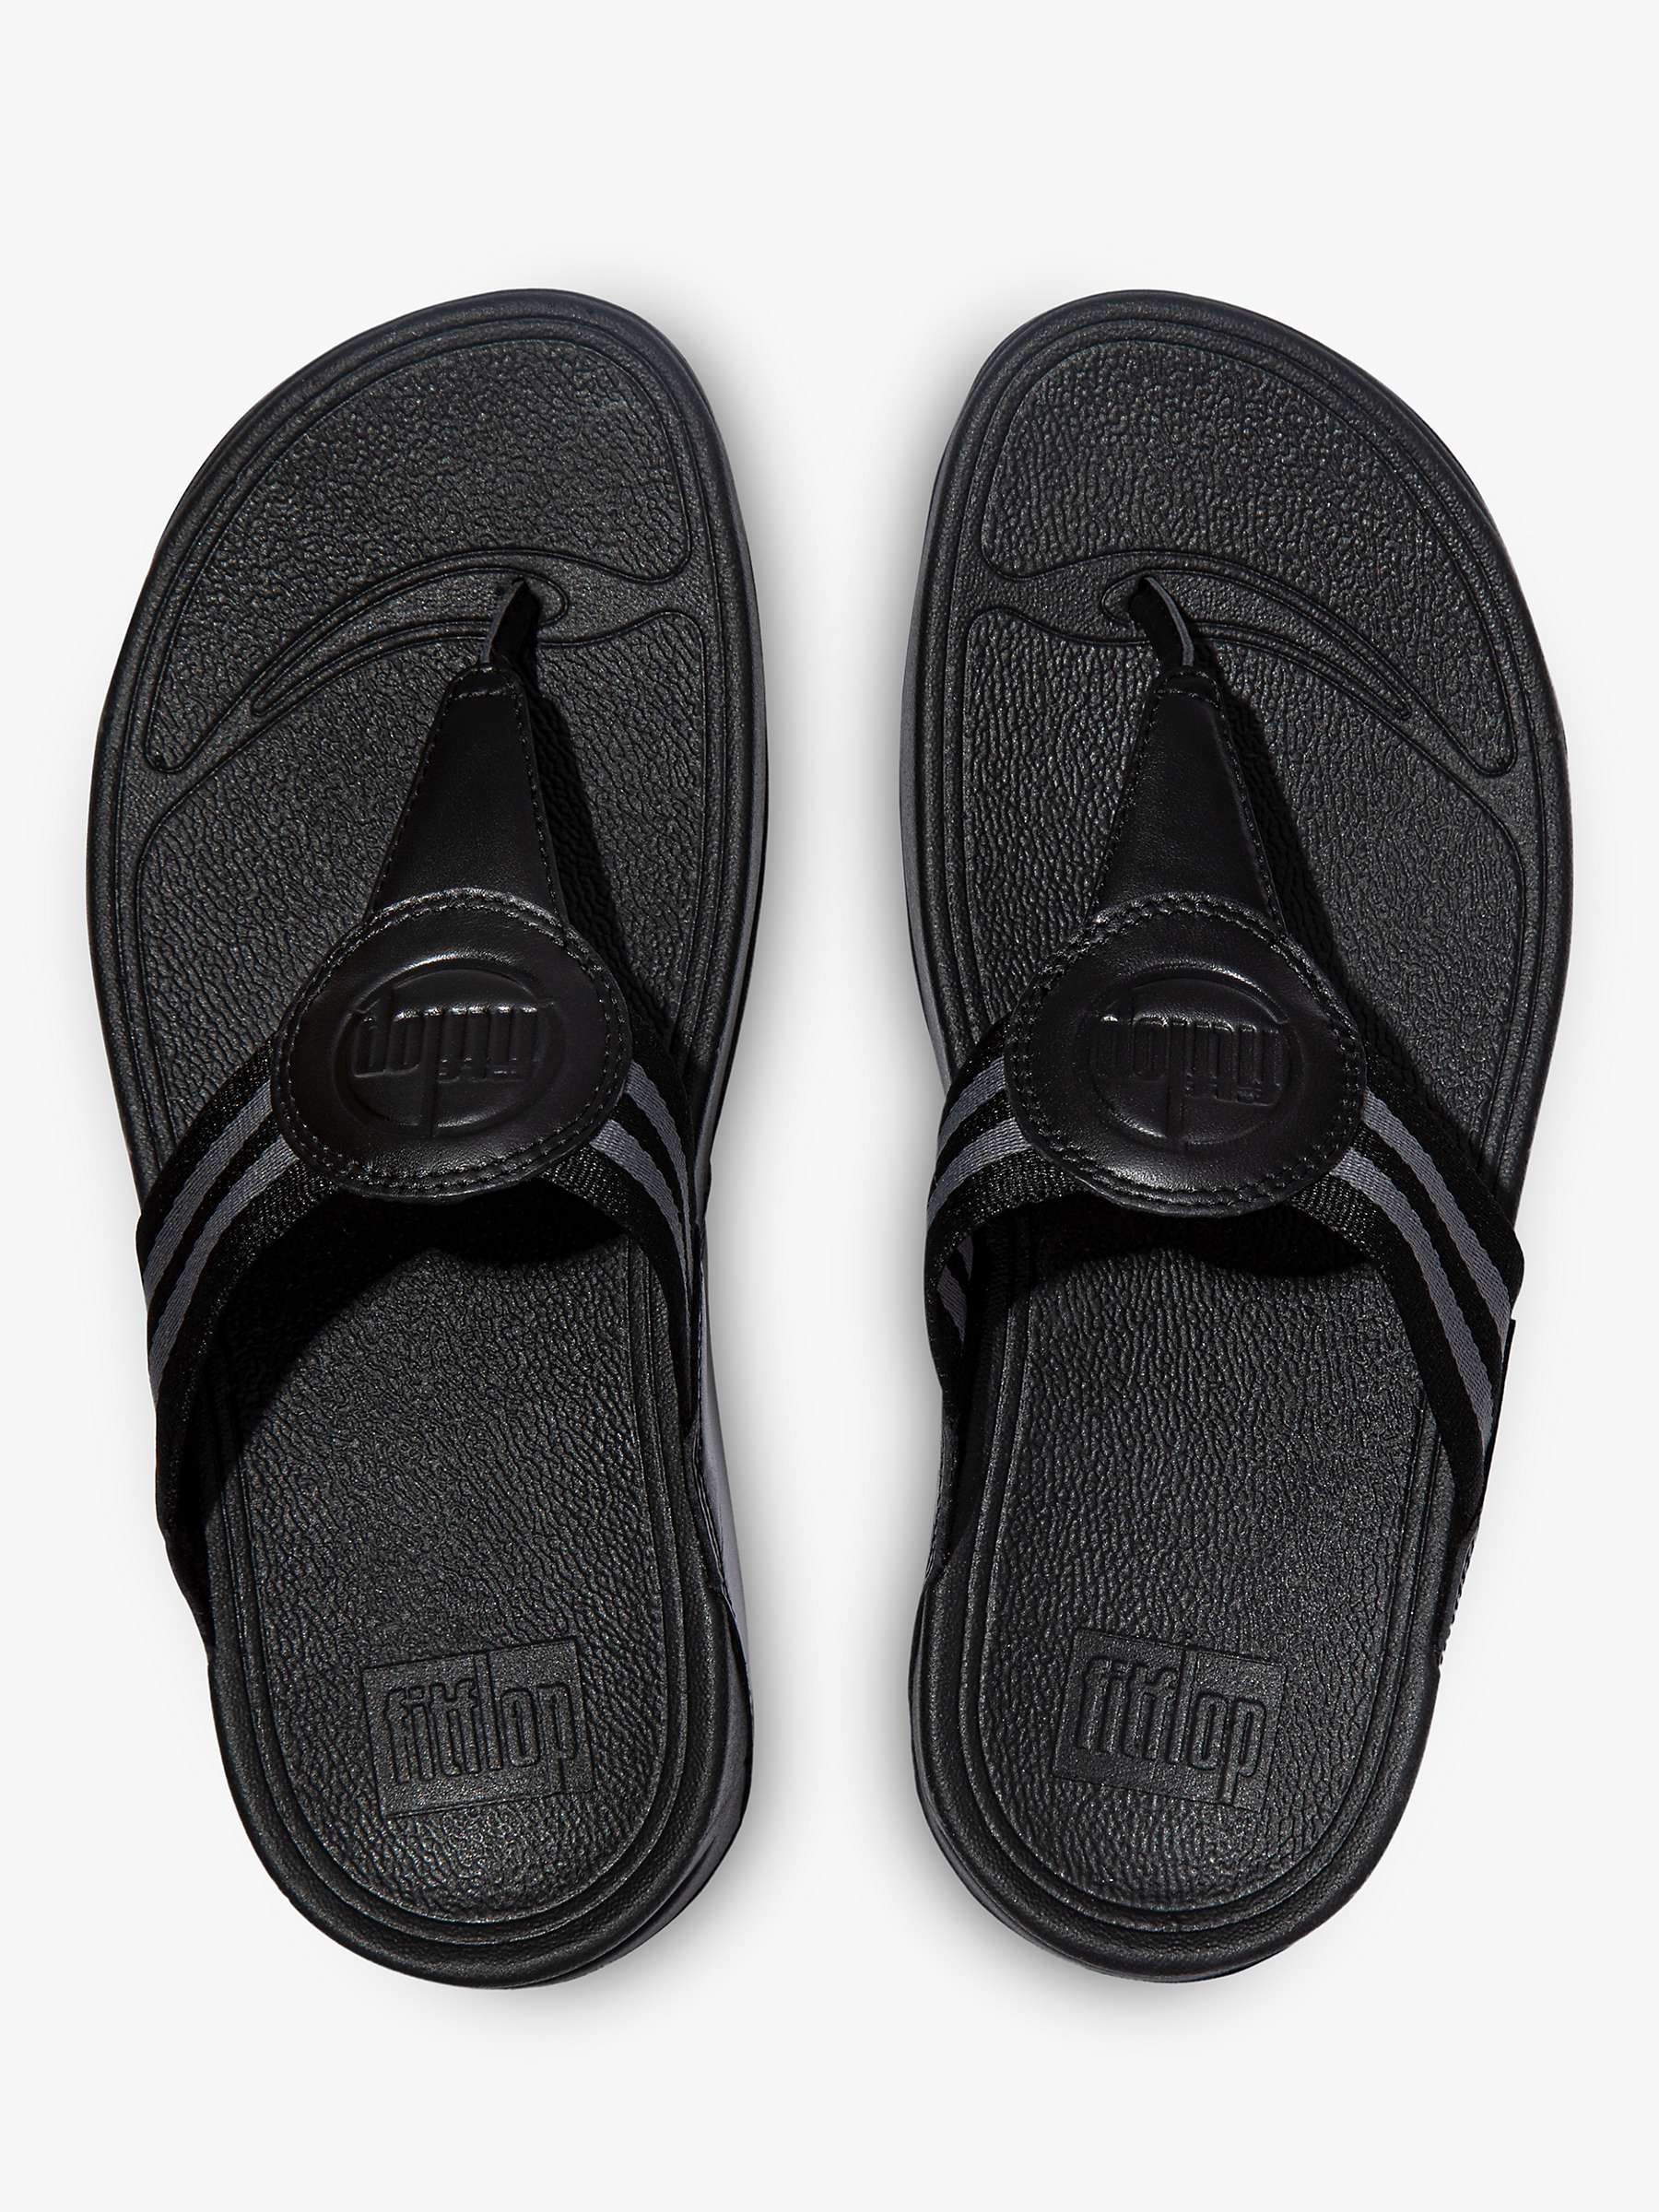 Buy FitFlop Walkstar Leather Mix Toe Post Sandals Online at johnlewis.com